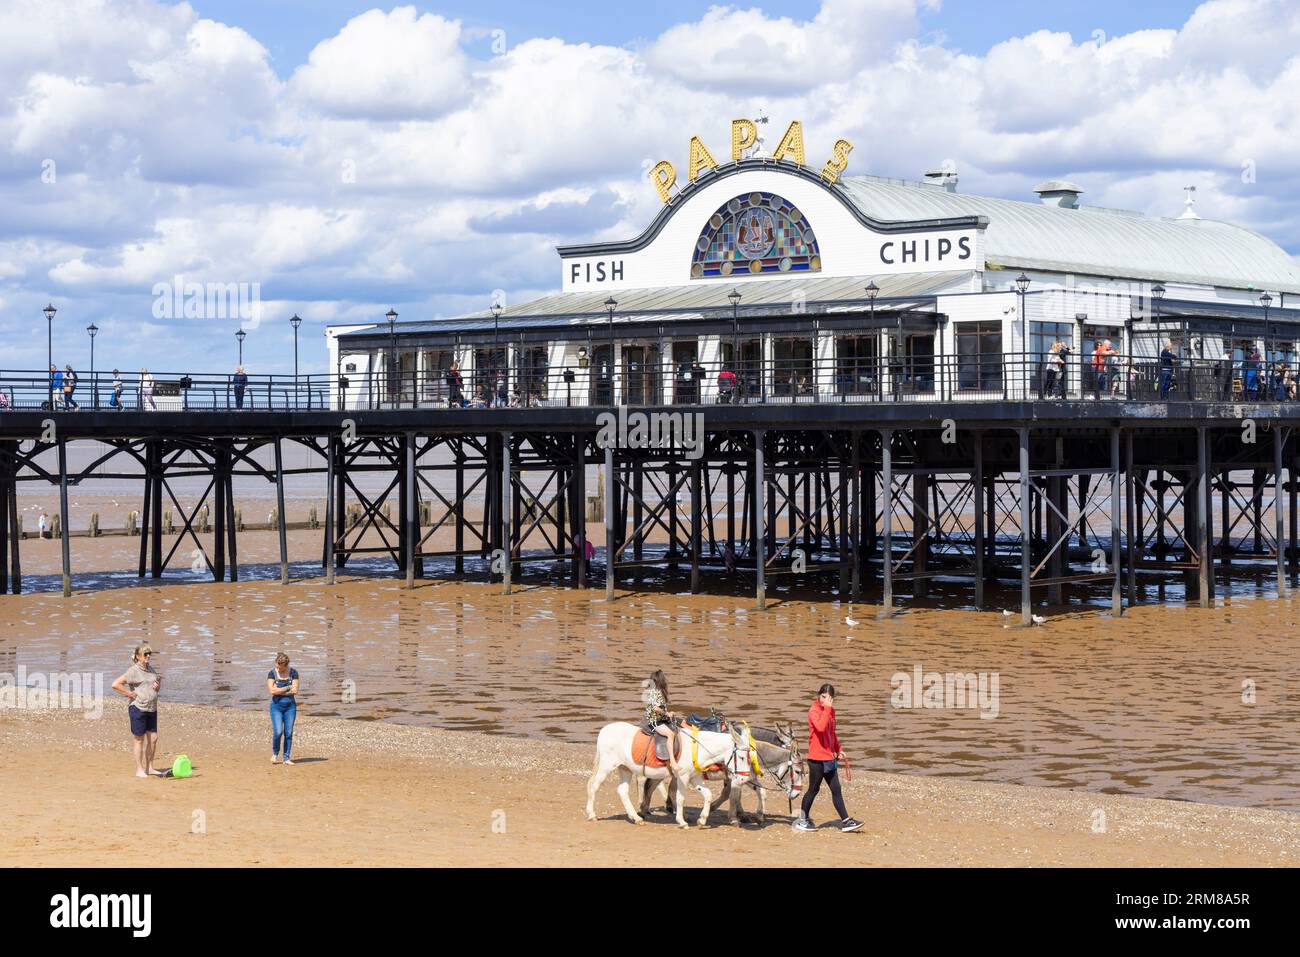 Cleethorpes Pier Cleethorpes Papas fish and chips restaurant and takeaway and donkey rides on the beach Cleethorpes Lincolnshire England UK GB Europe Stock Photo